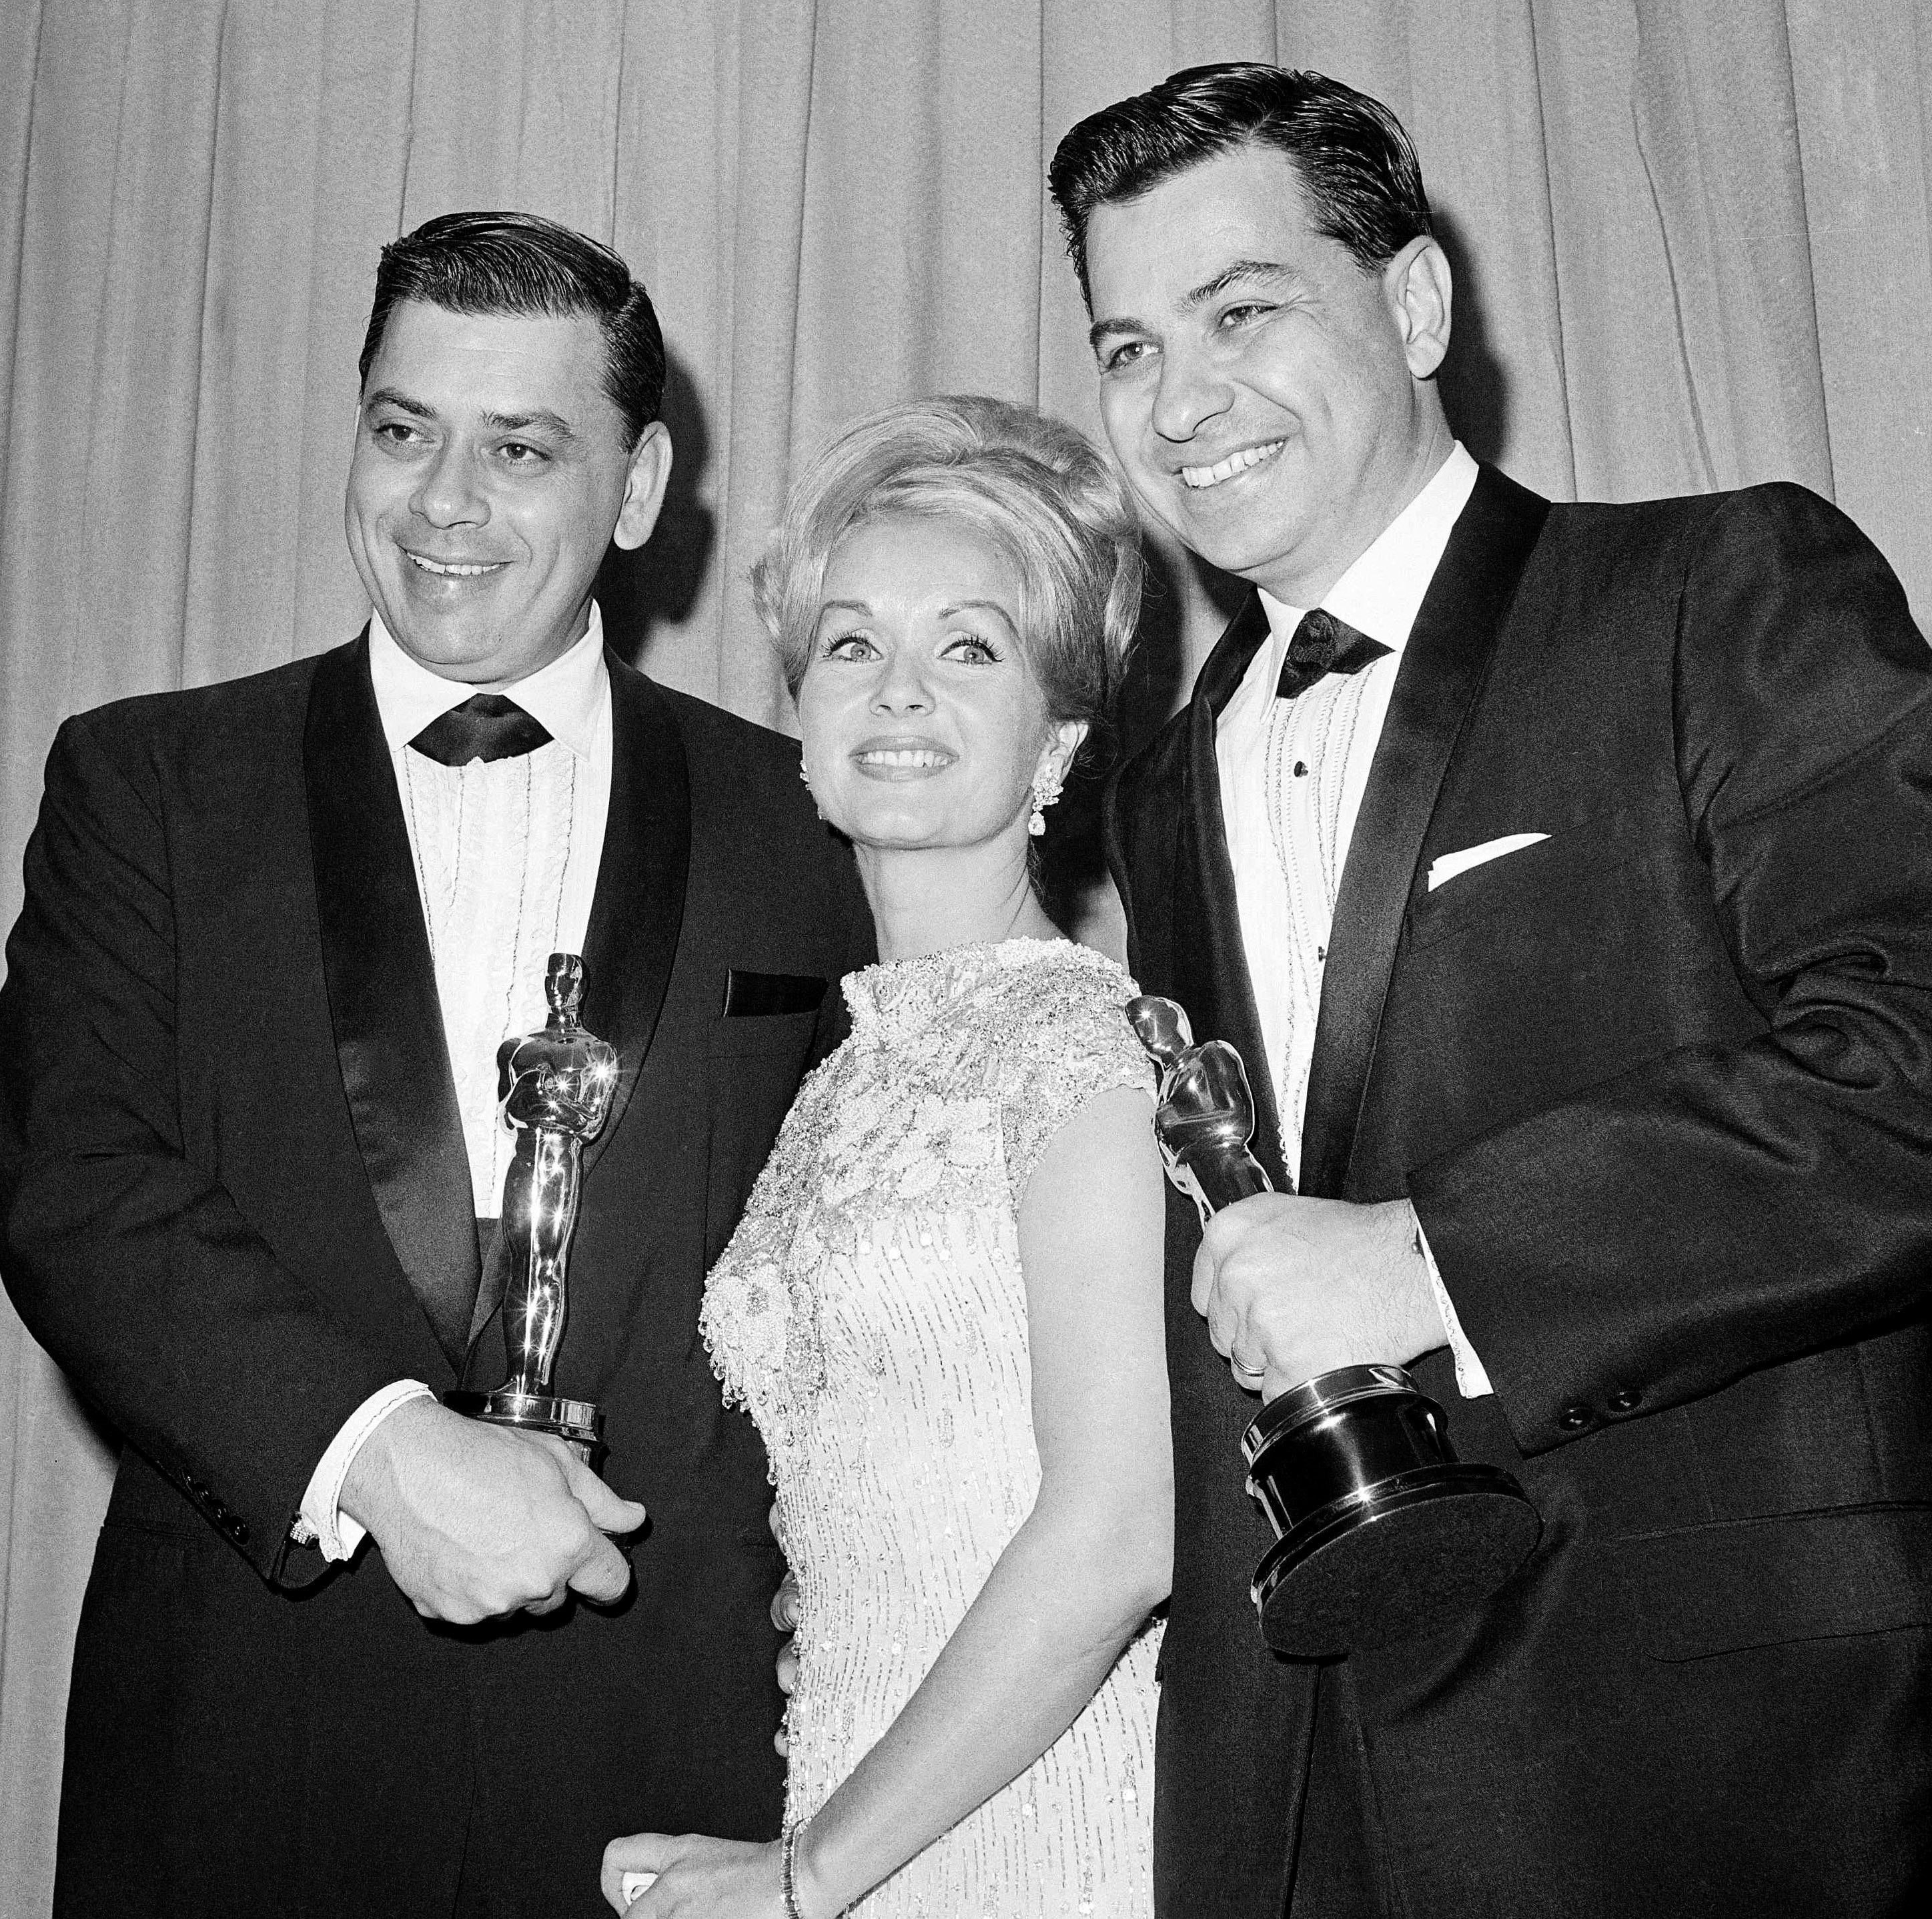 Debbie Reynolds poses with Richard M. Sherman, right, and Robert Sherman, left, who received the Academy Awards for Best Song and Best Score for ‘Mary Poppins’, 1965